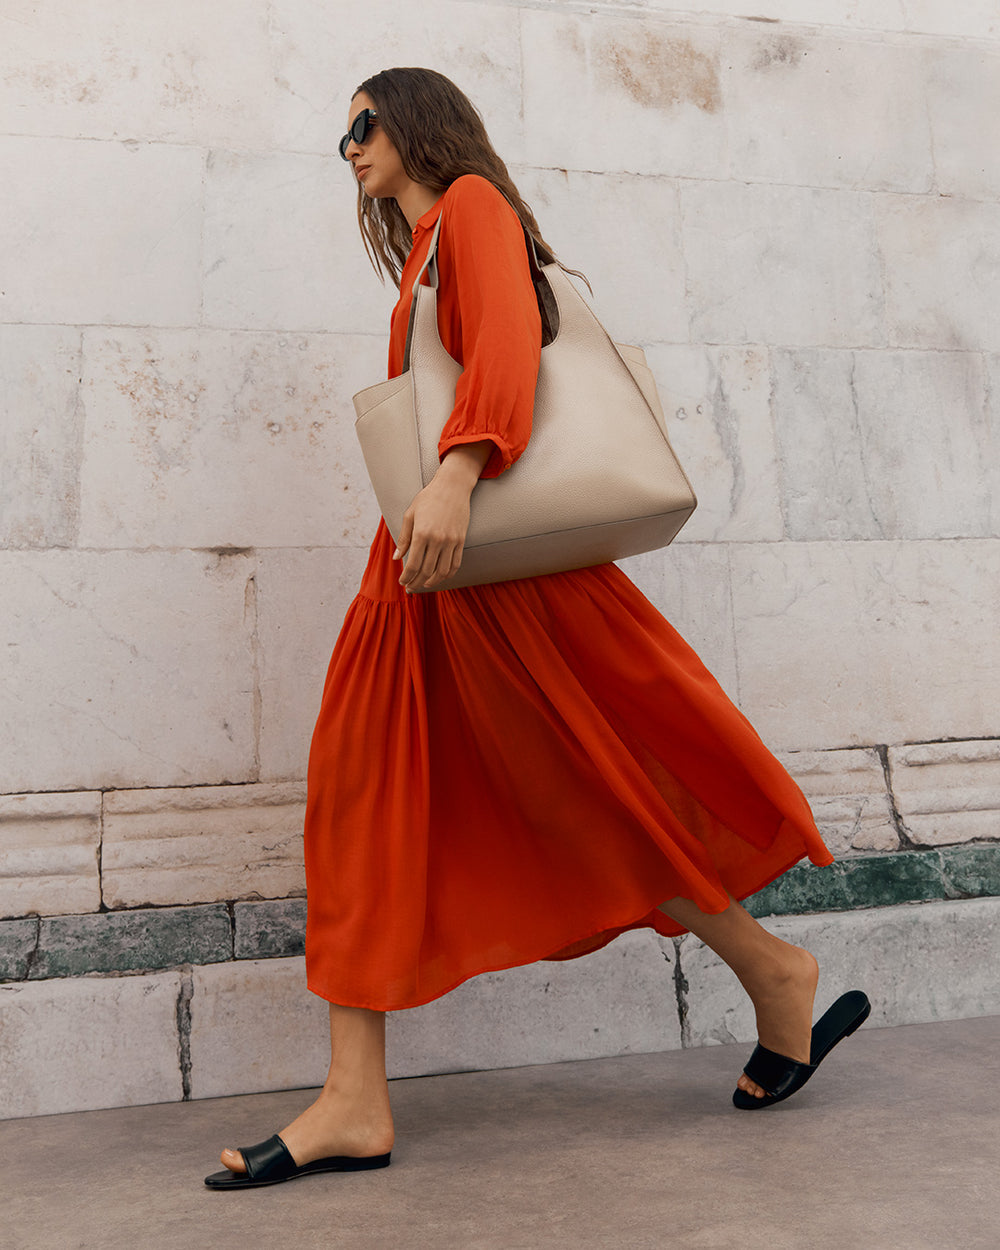 Woman walking with a tote bag wearing a dress and sandals.